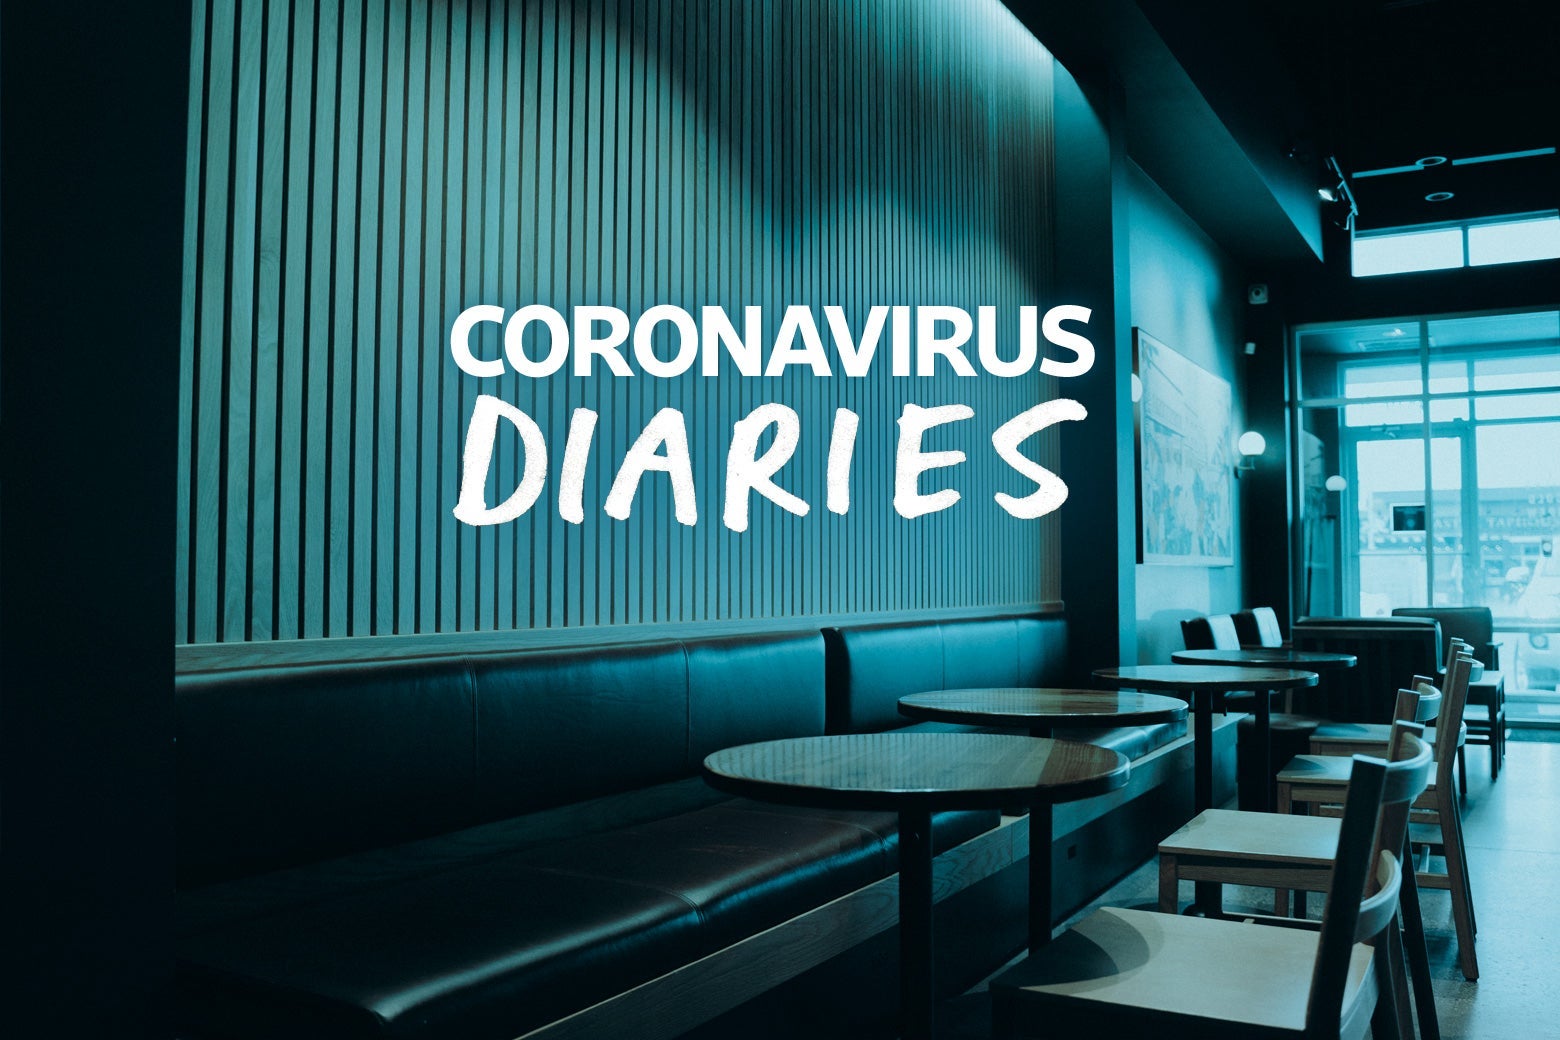 The words "Coronavirus Diaries" are imposed over an empty restaurant, with tables and chairs and benches and walls shown.